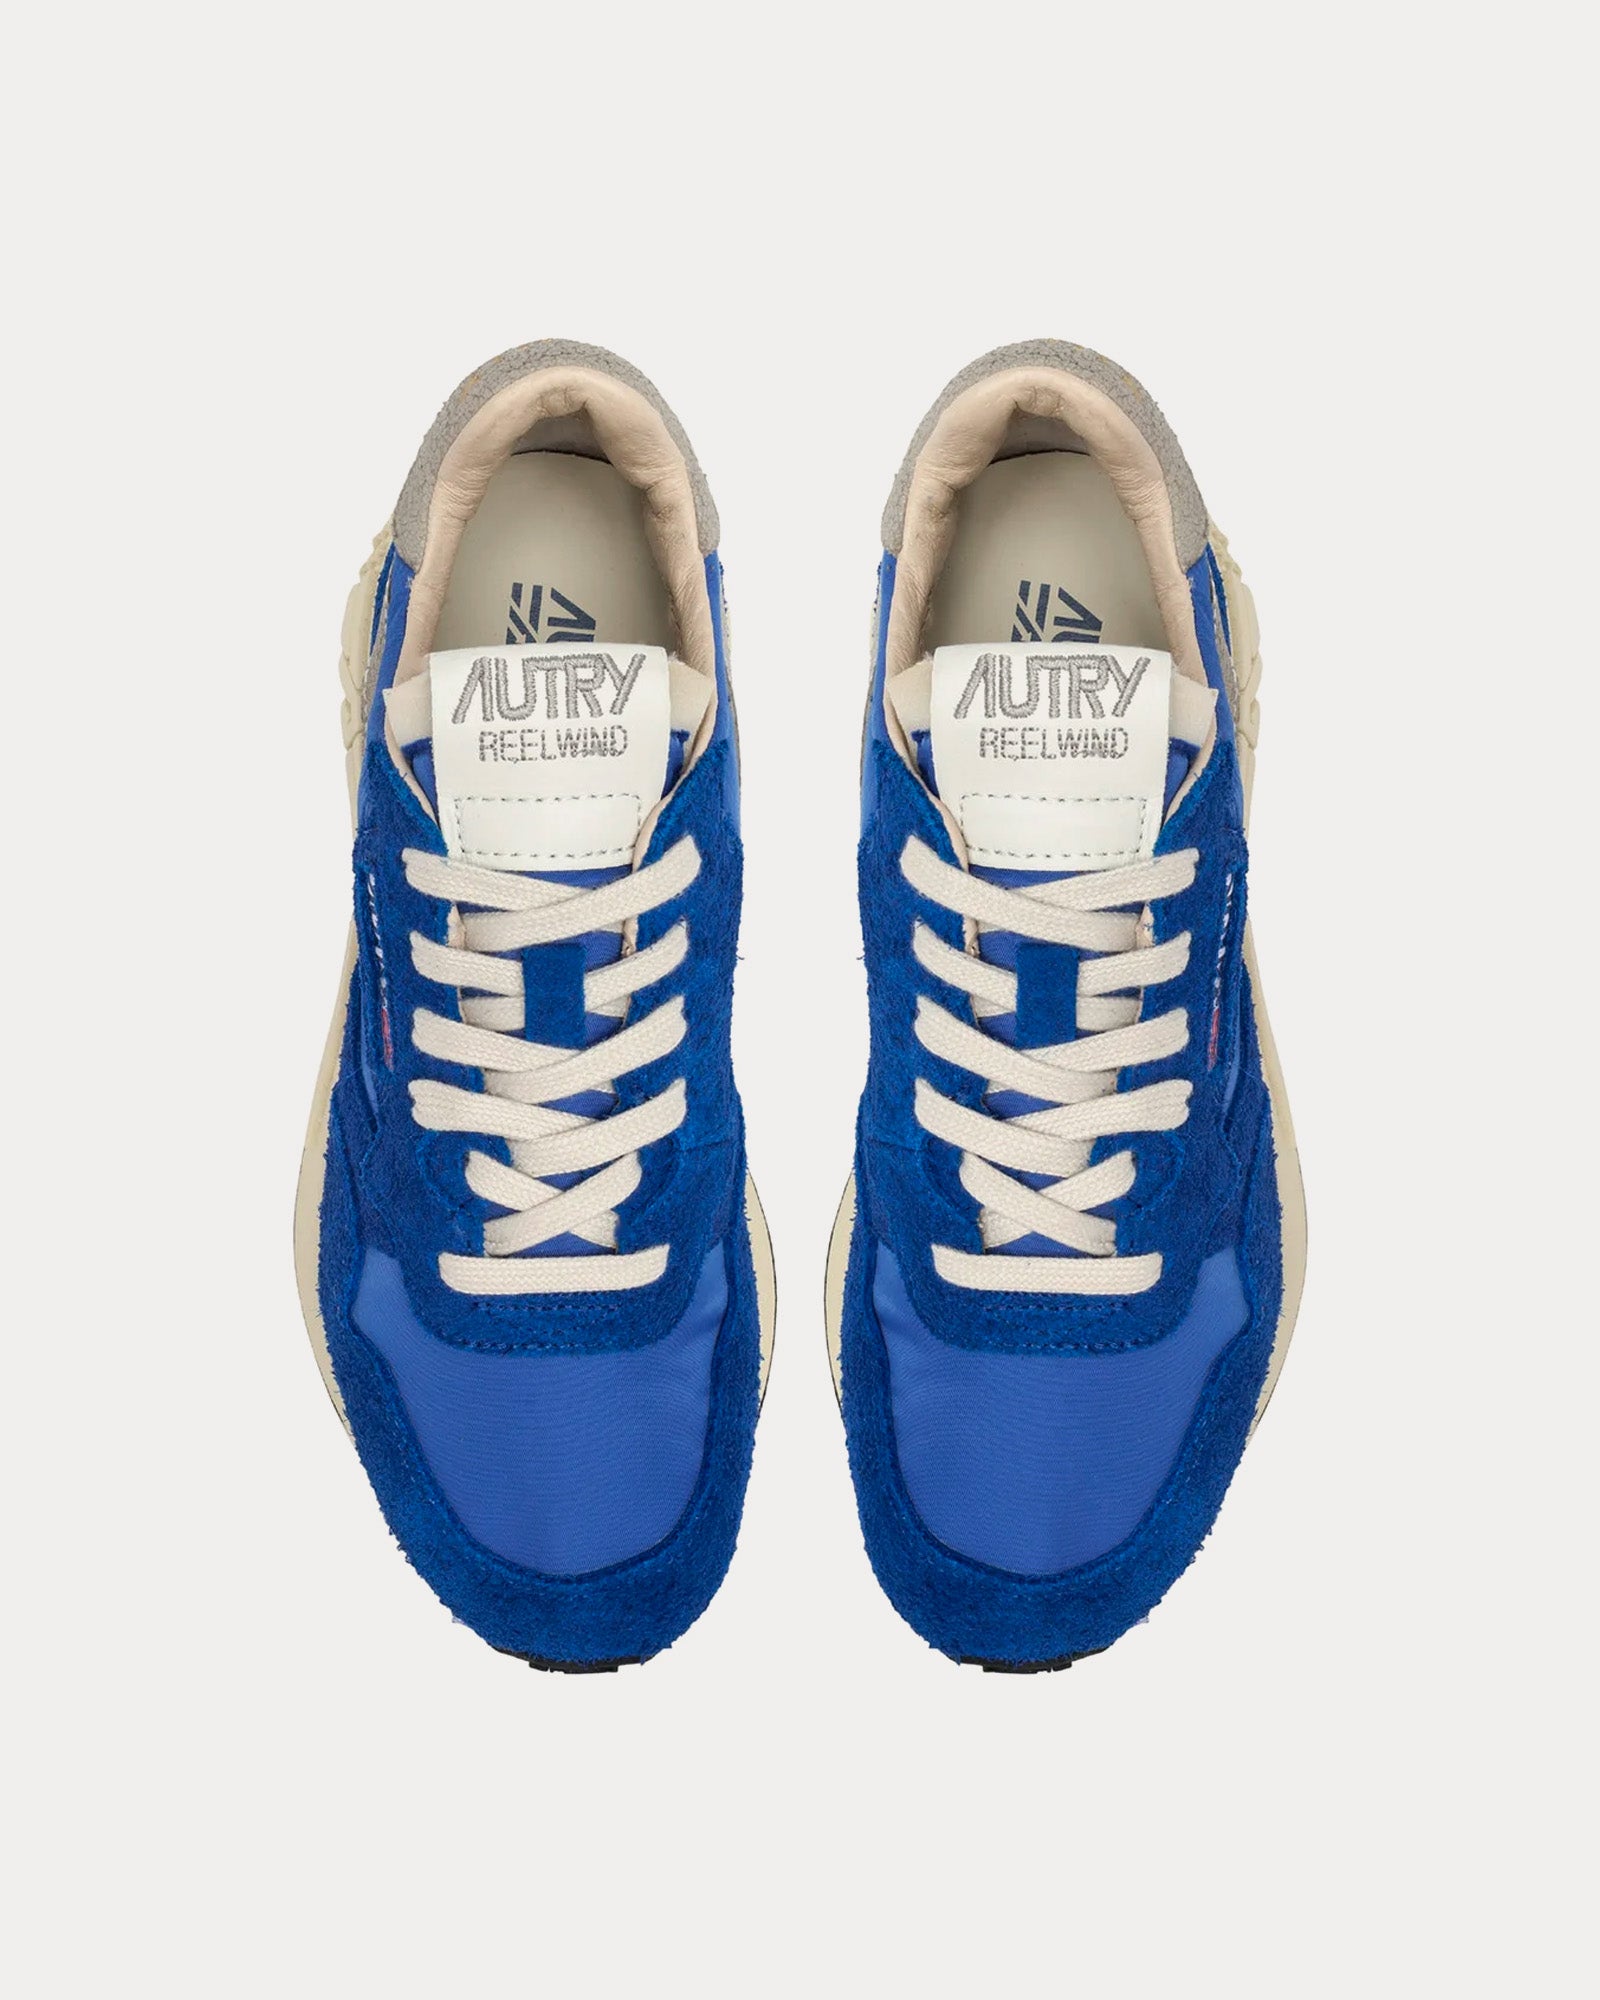 Autry - Reelwind Nylon & Suede Electric Blue Low Top Sneakers